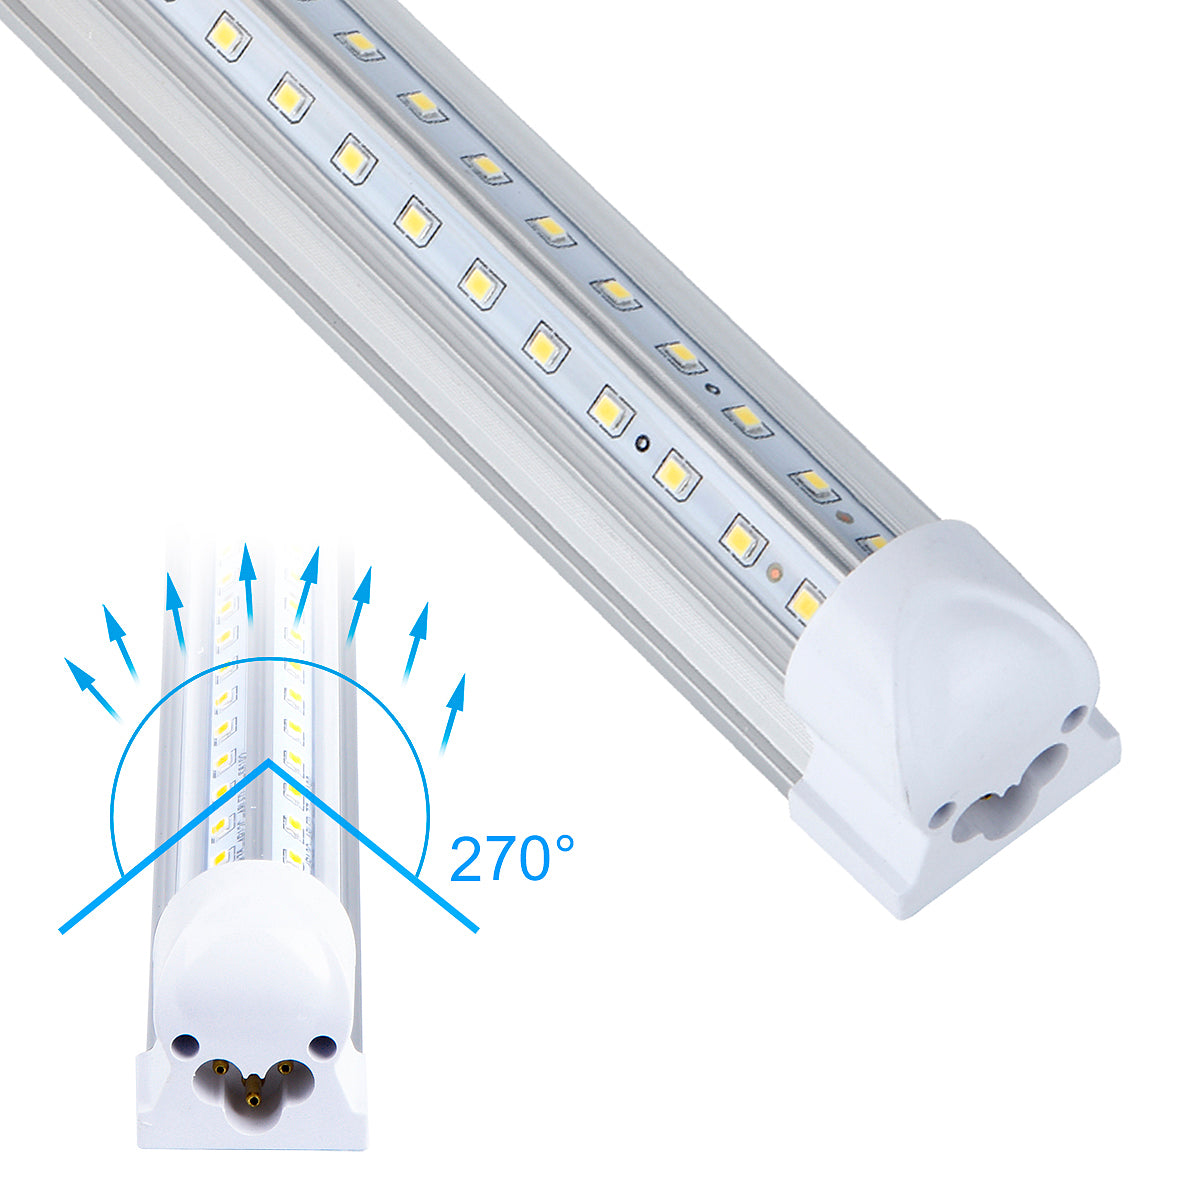 10-Pack 8ft LED Shop Light Fixture - 90W T8 Integrated LED Tube Light -  6500K 12000LM V-Shape Linkable - High Output - Clear Cover - Plug and Play  